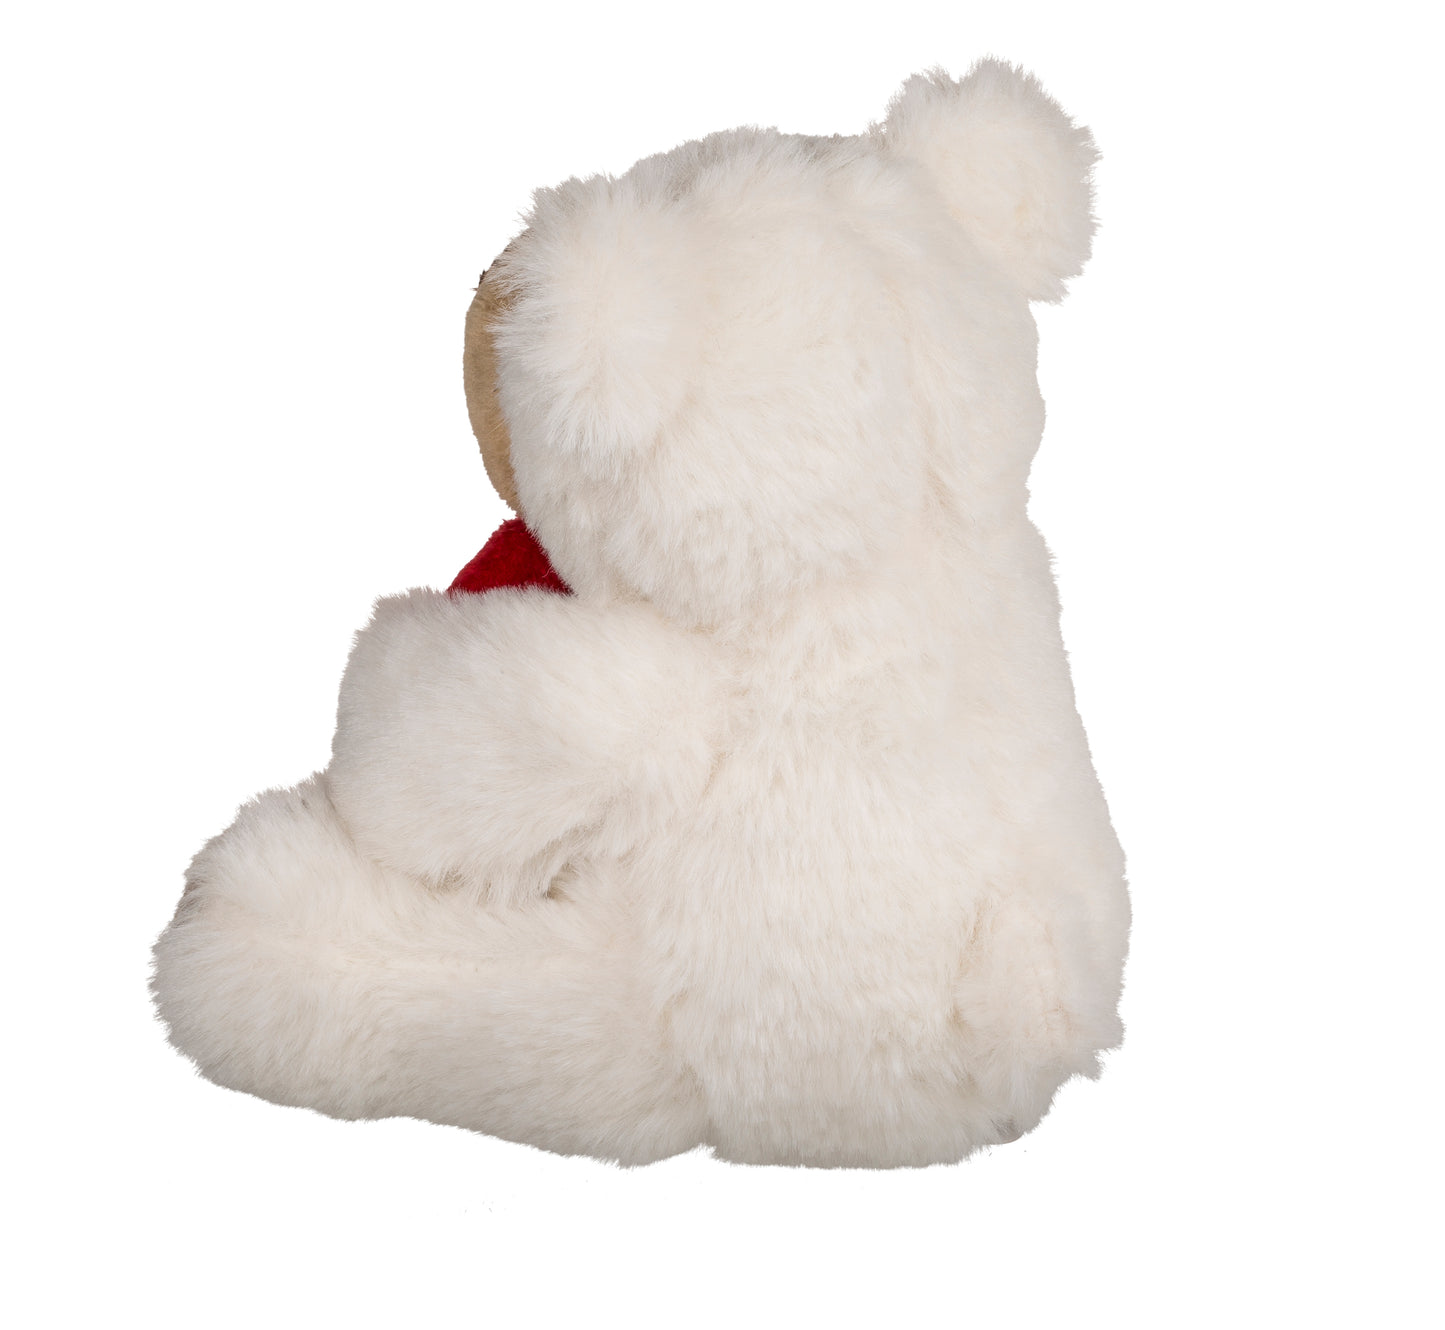 Small Cream Plush Teddy Bear with Red Heart